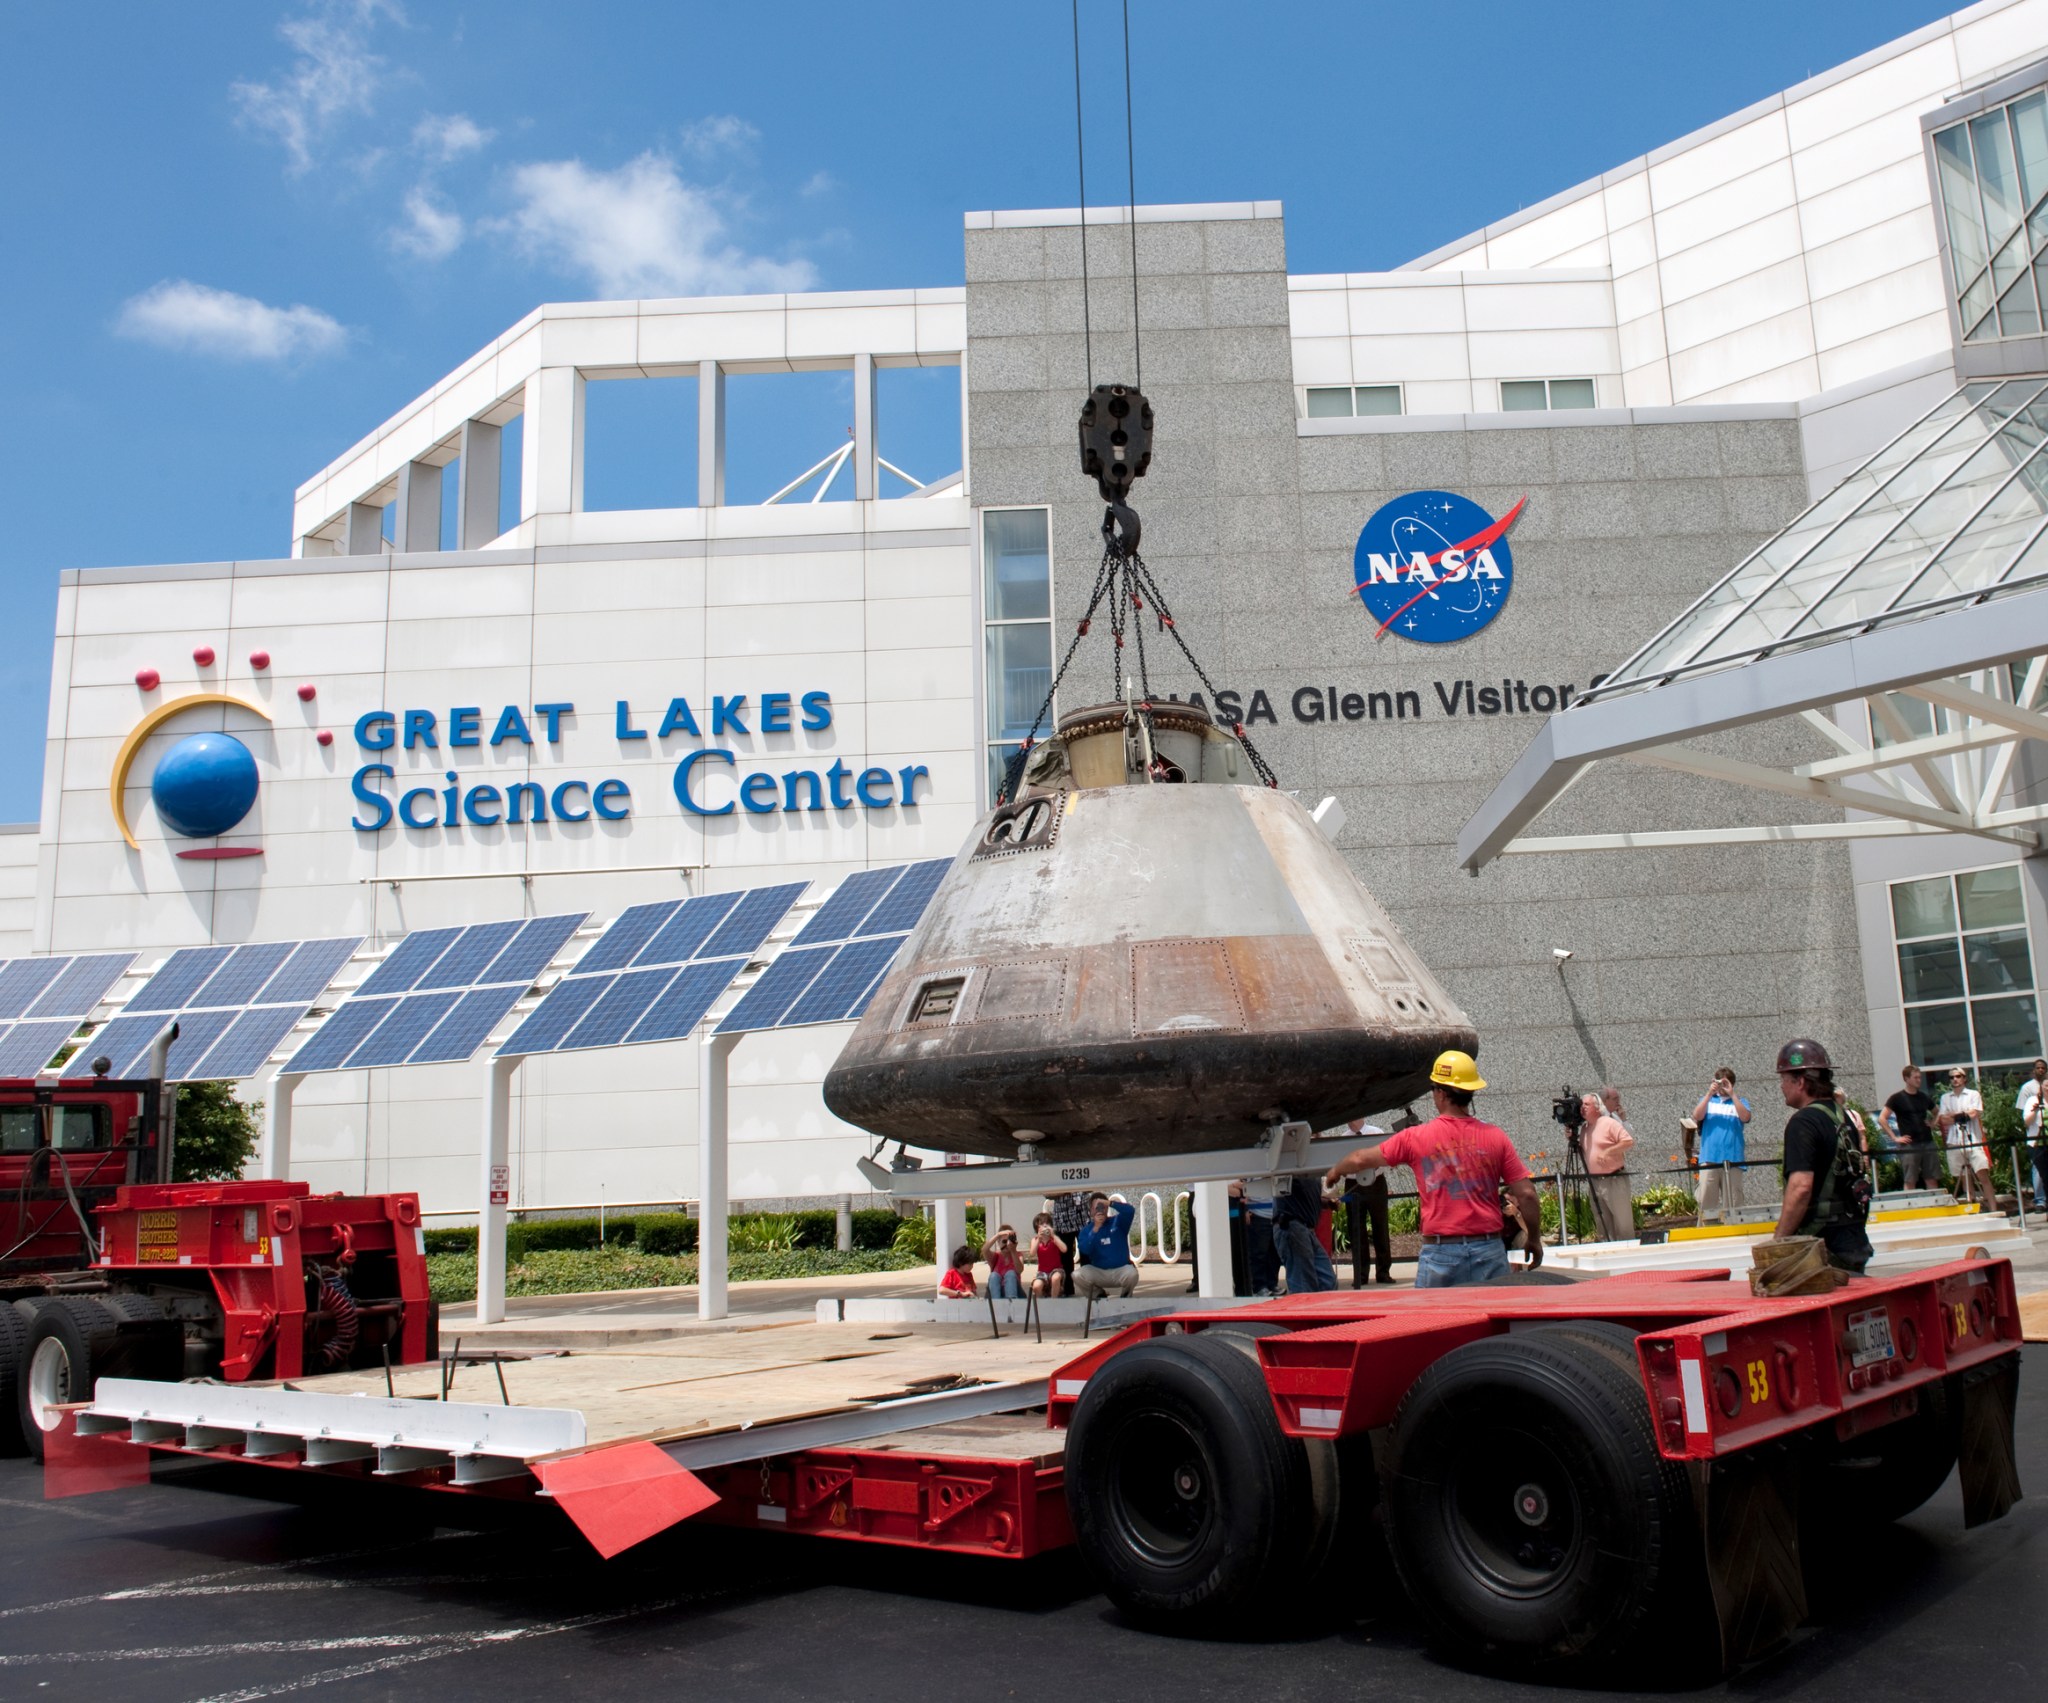 The command module is delivered to Great Lakes Science Center on June 22, 2010. The 30-minute move downtown required over a year of planning.